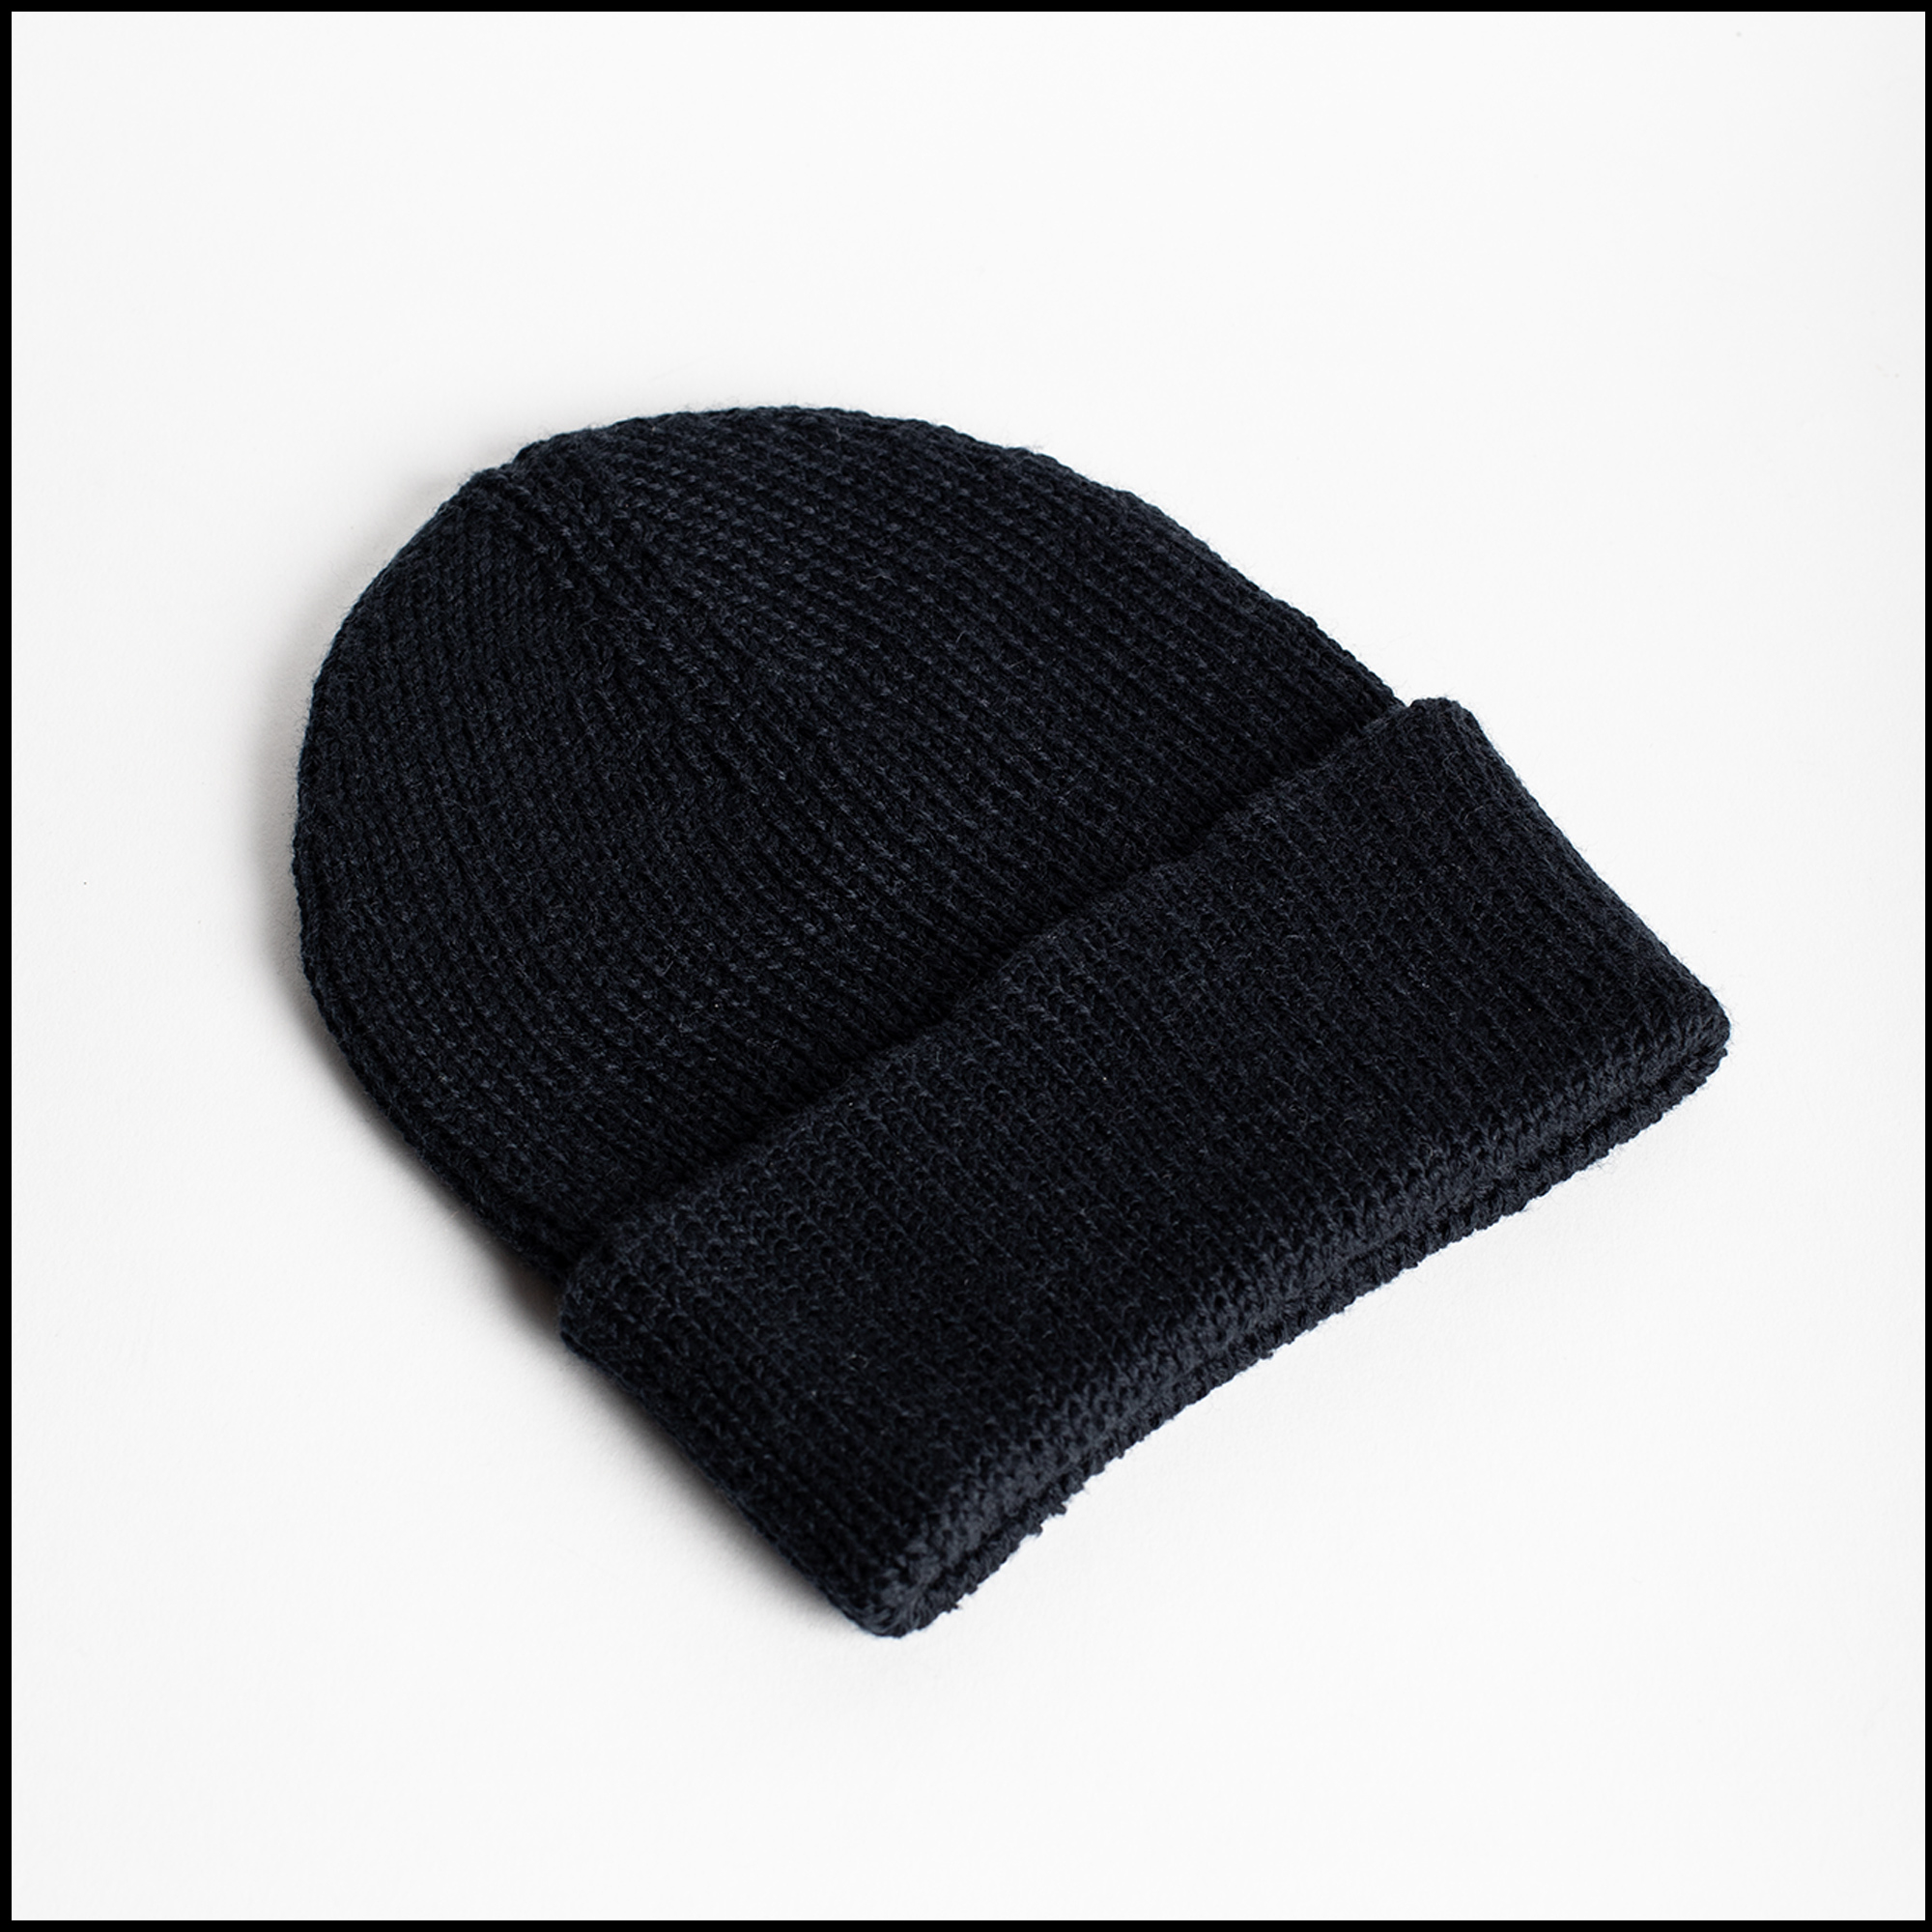 VICKO beanie in Midnight color by Arpenteur